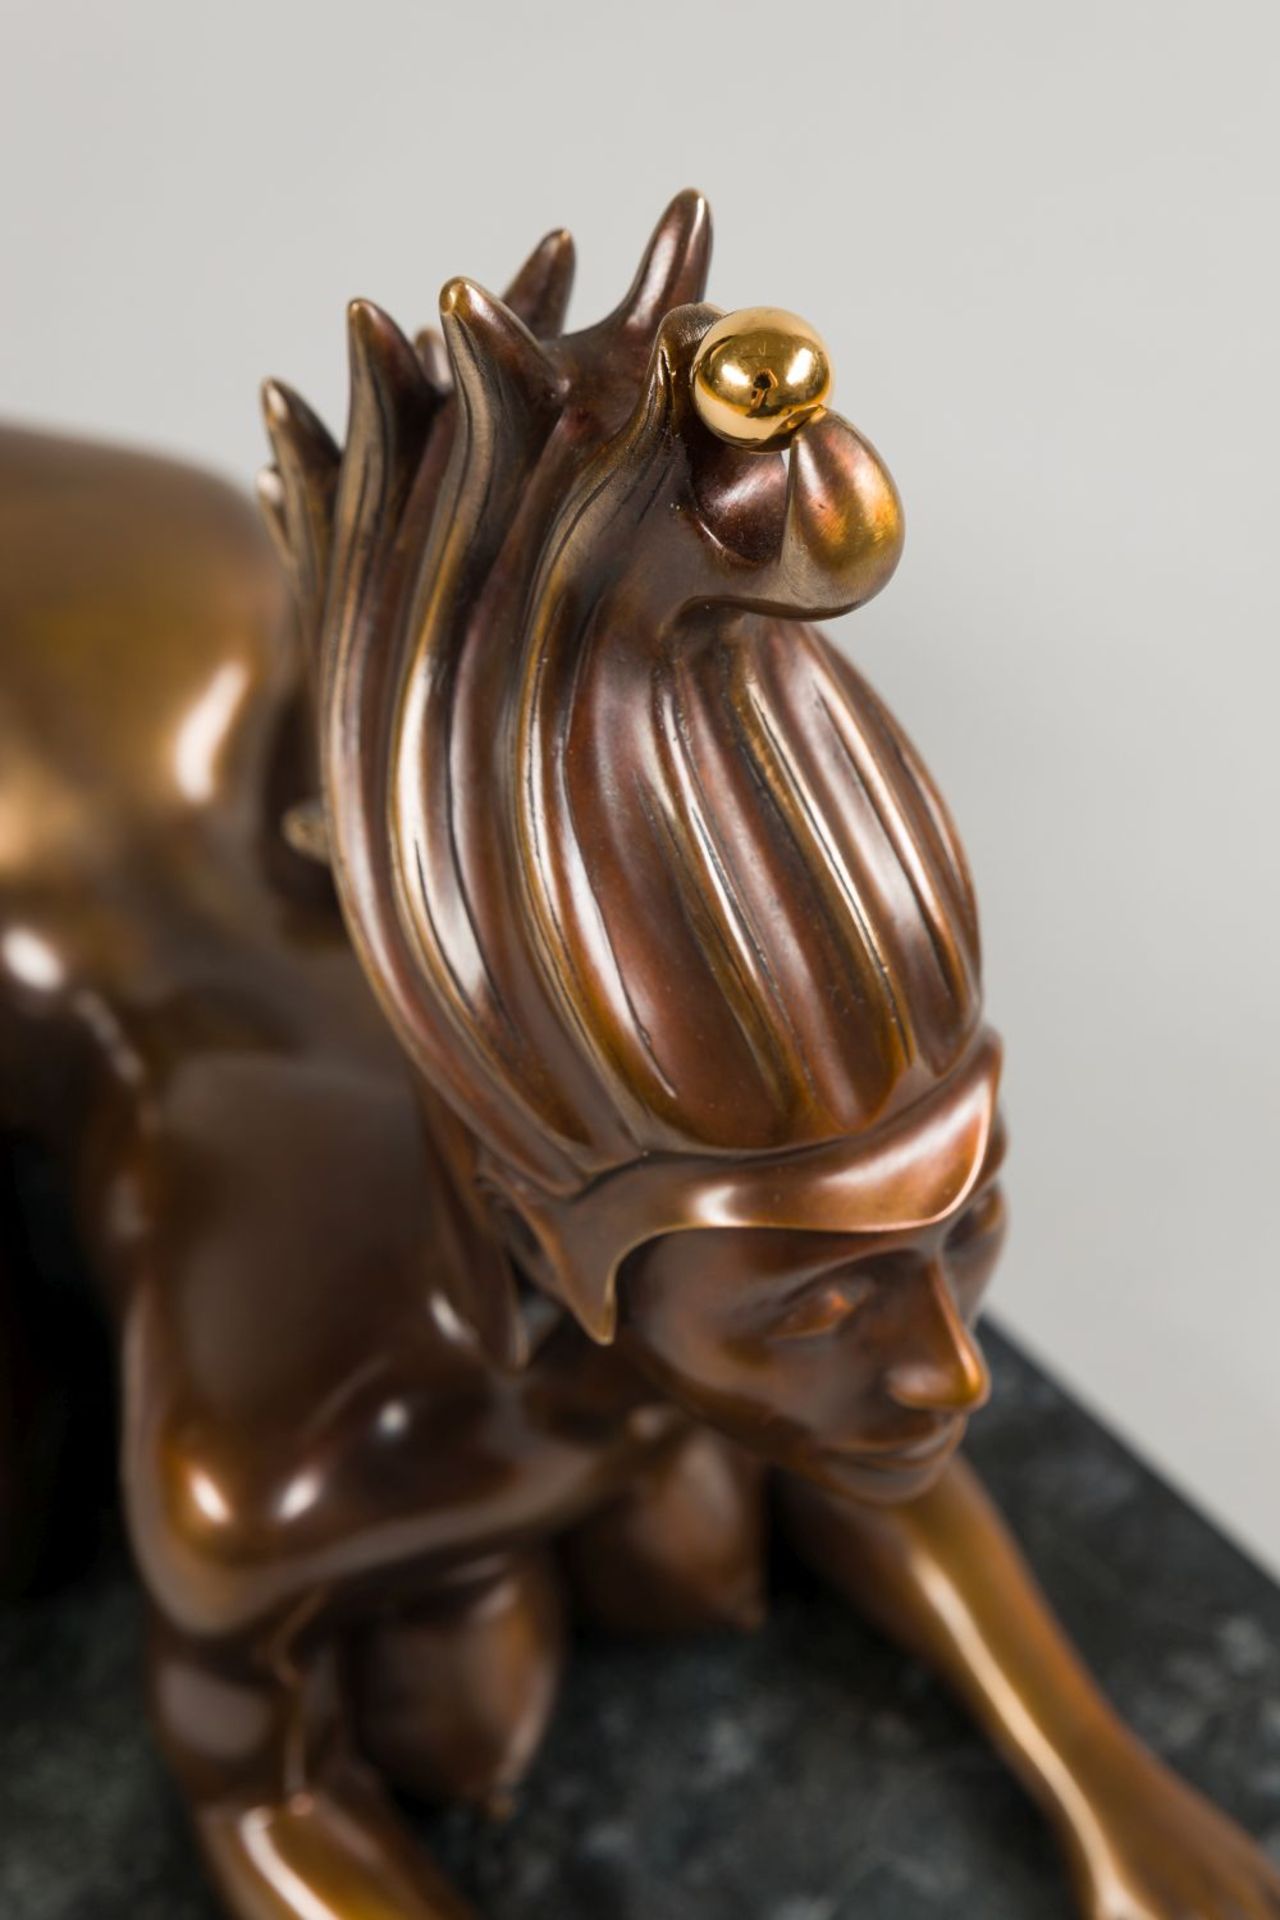 Viennese Sphinx Bronze on granite-pedestal Signed and numbered: 32/500 12,6 x 7,9 in - Image 3 of 11